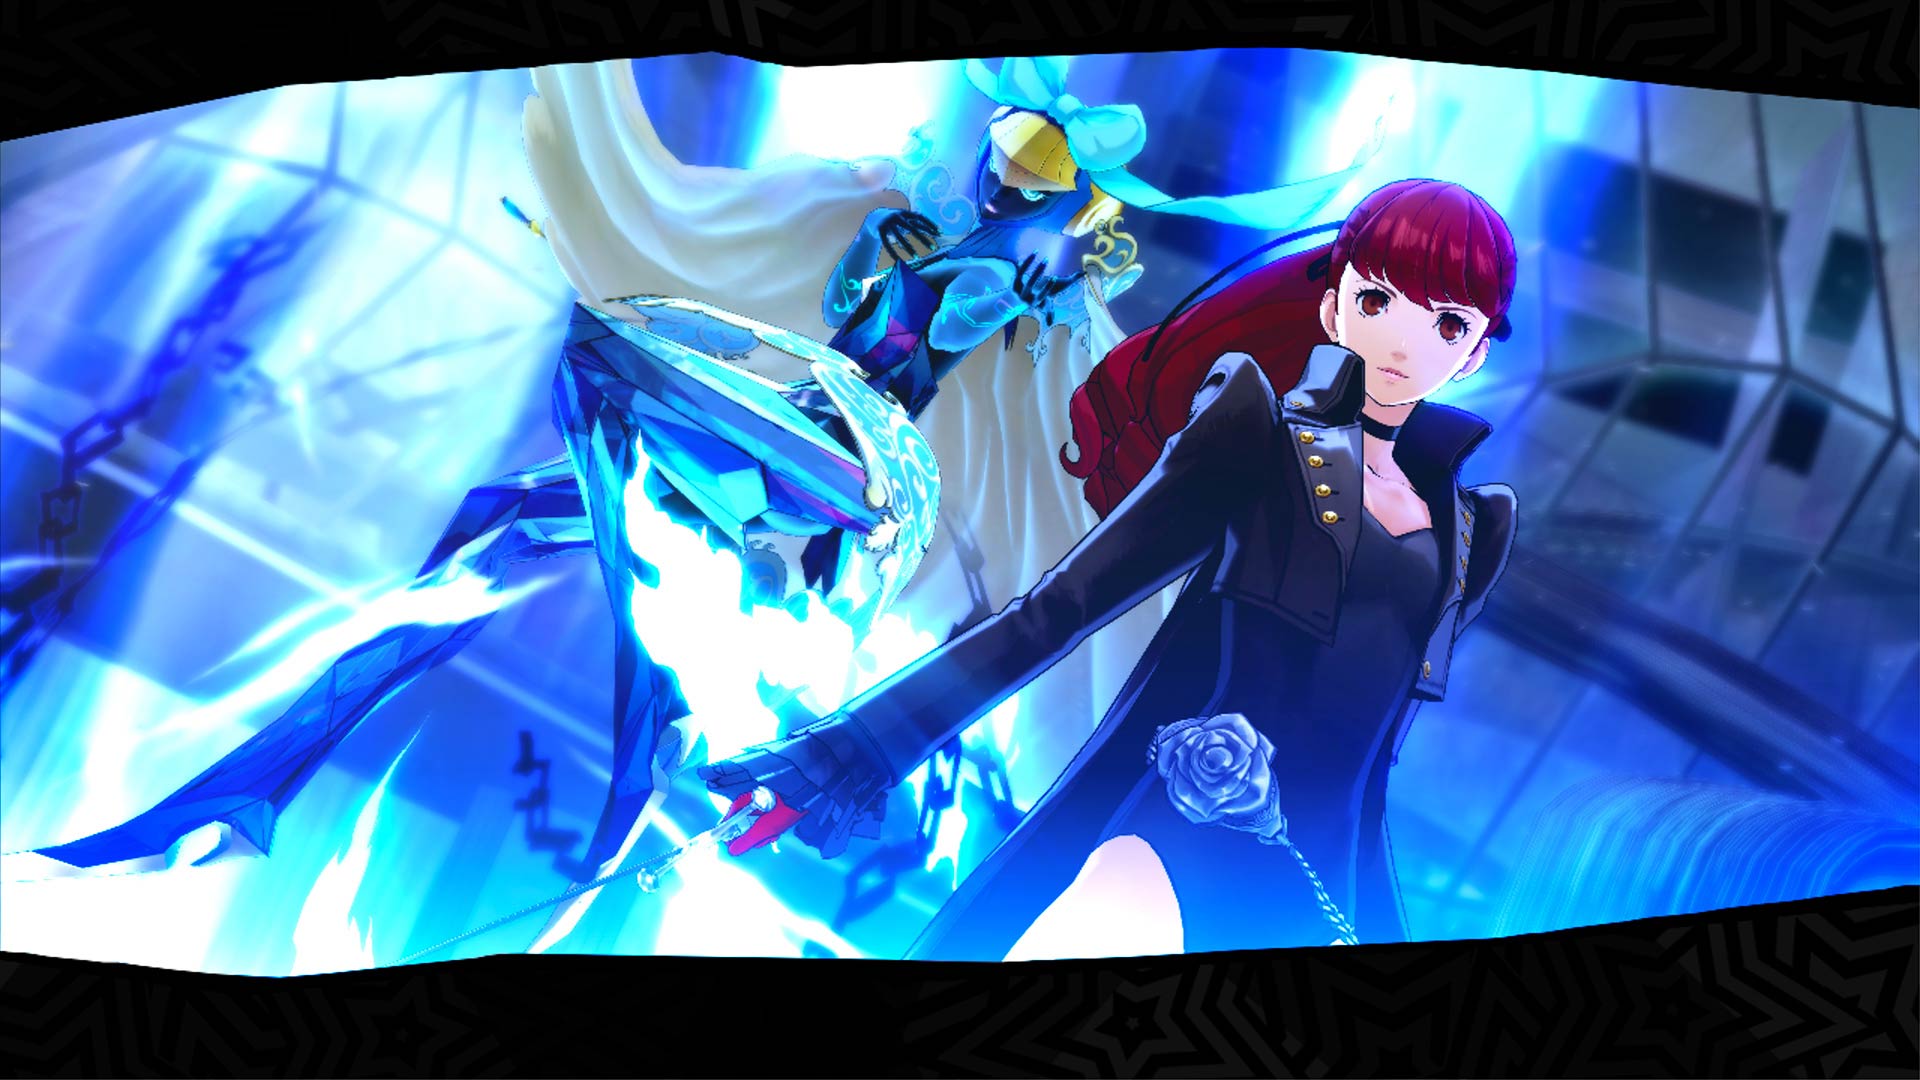 If you play Persona 5 Royal 8+ hours a day that's technically a full-time job, which makes you a pro Persona player. Go get some sponsorships. (Image: Atlus)